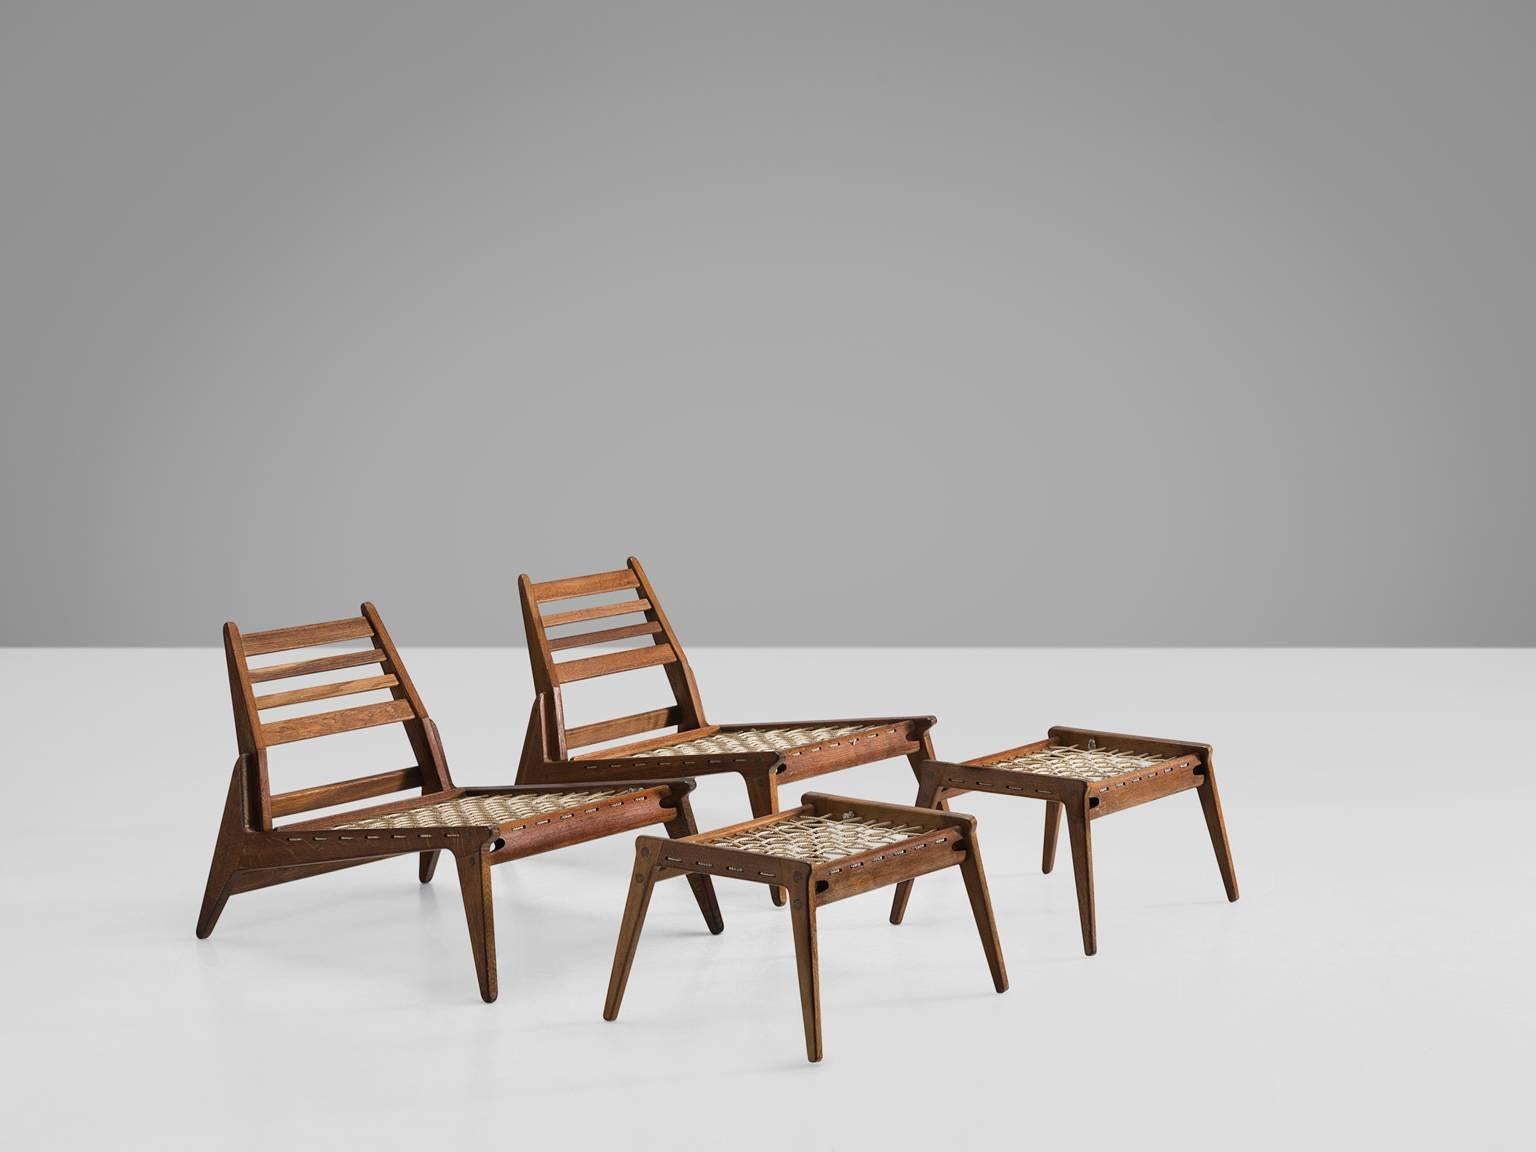 Pair of lounge chairs with ottomans, in oak, Germany, 1950s. 

Set of two modular chaise longue, existing of a lounge chair and ottoman. These relaxing hunting chairs show a basic minimal design with great woodworking. An open character is created